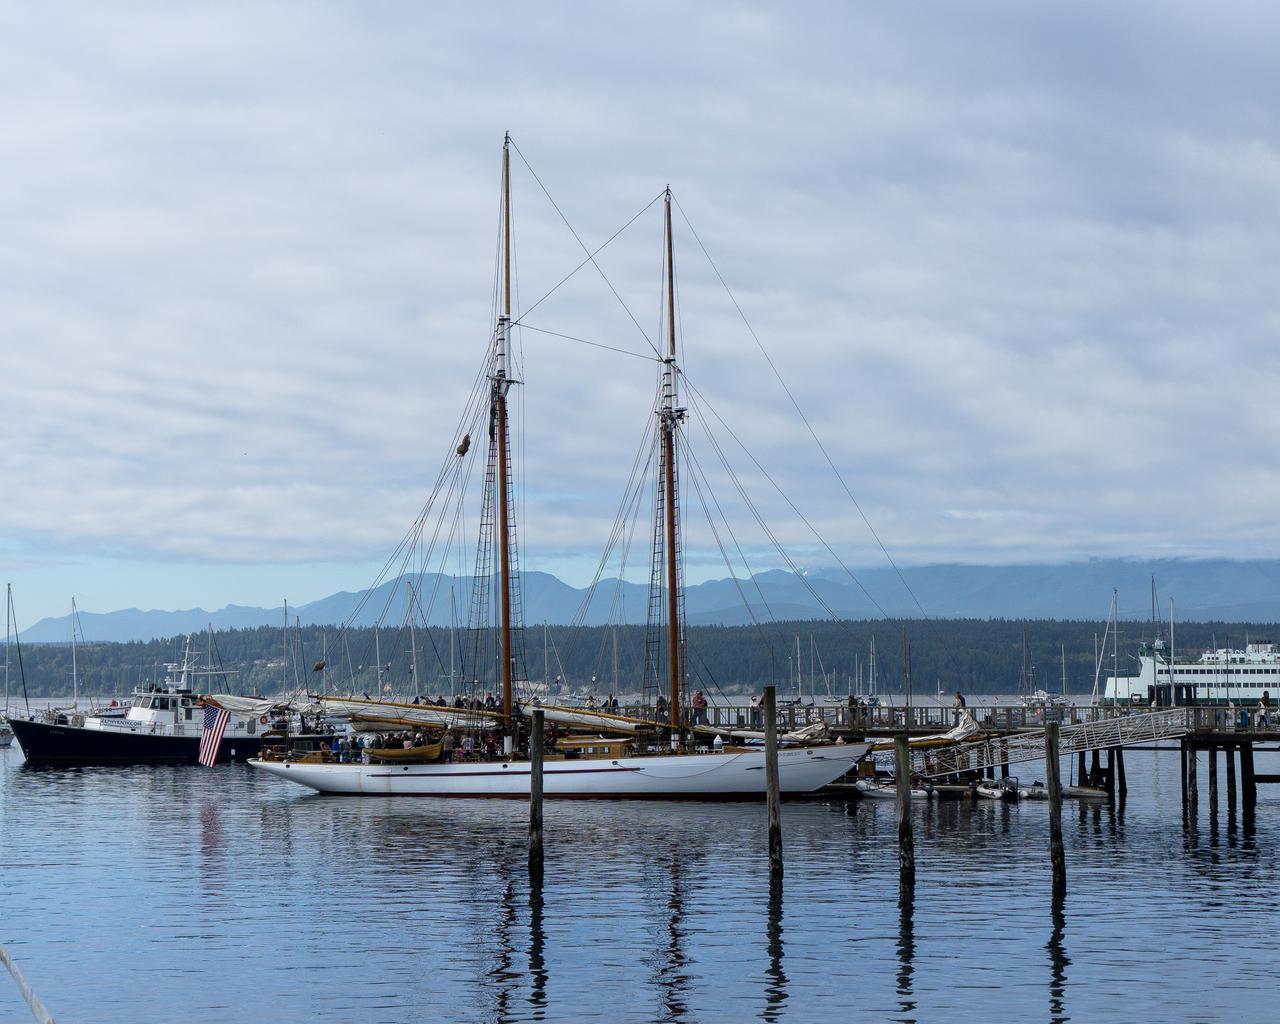 Port Townsend on the Olympic Peninsula in Washington